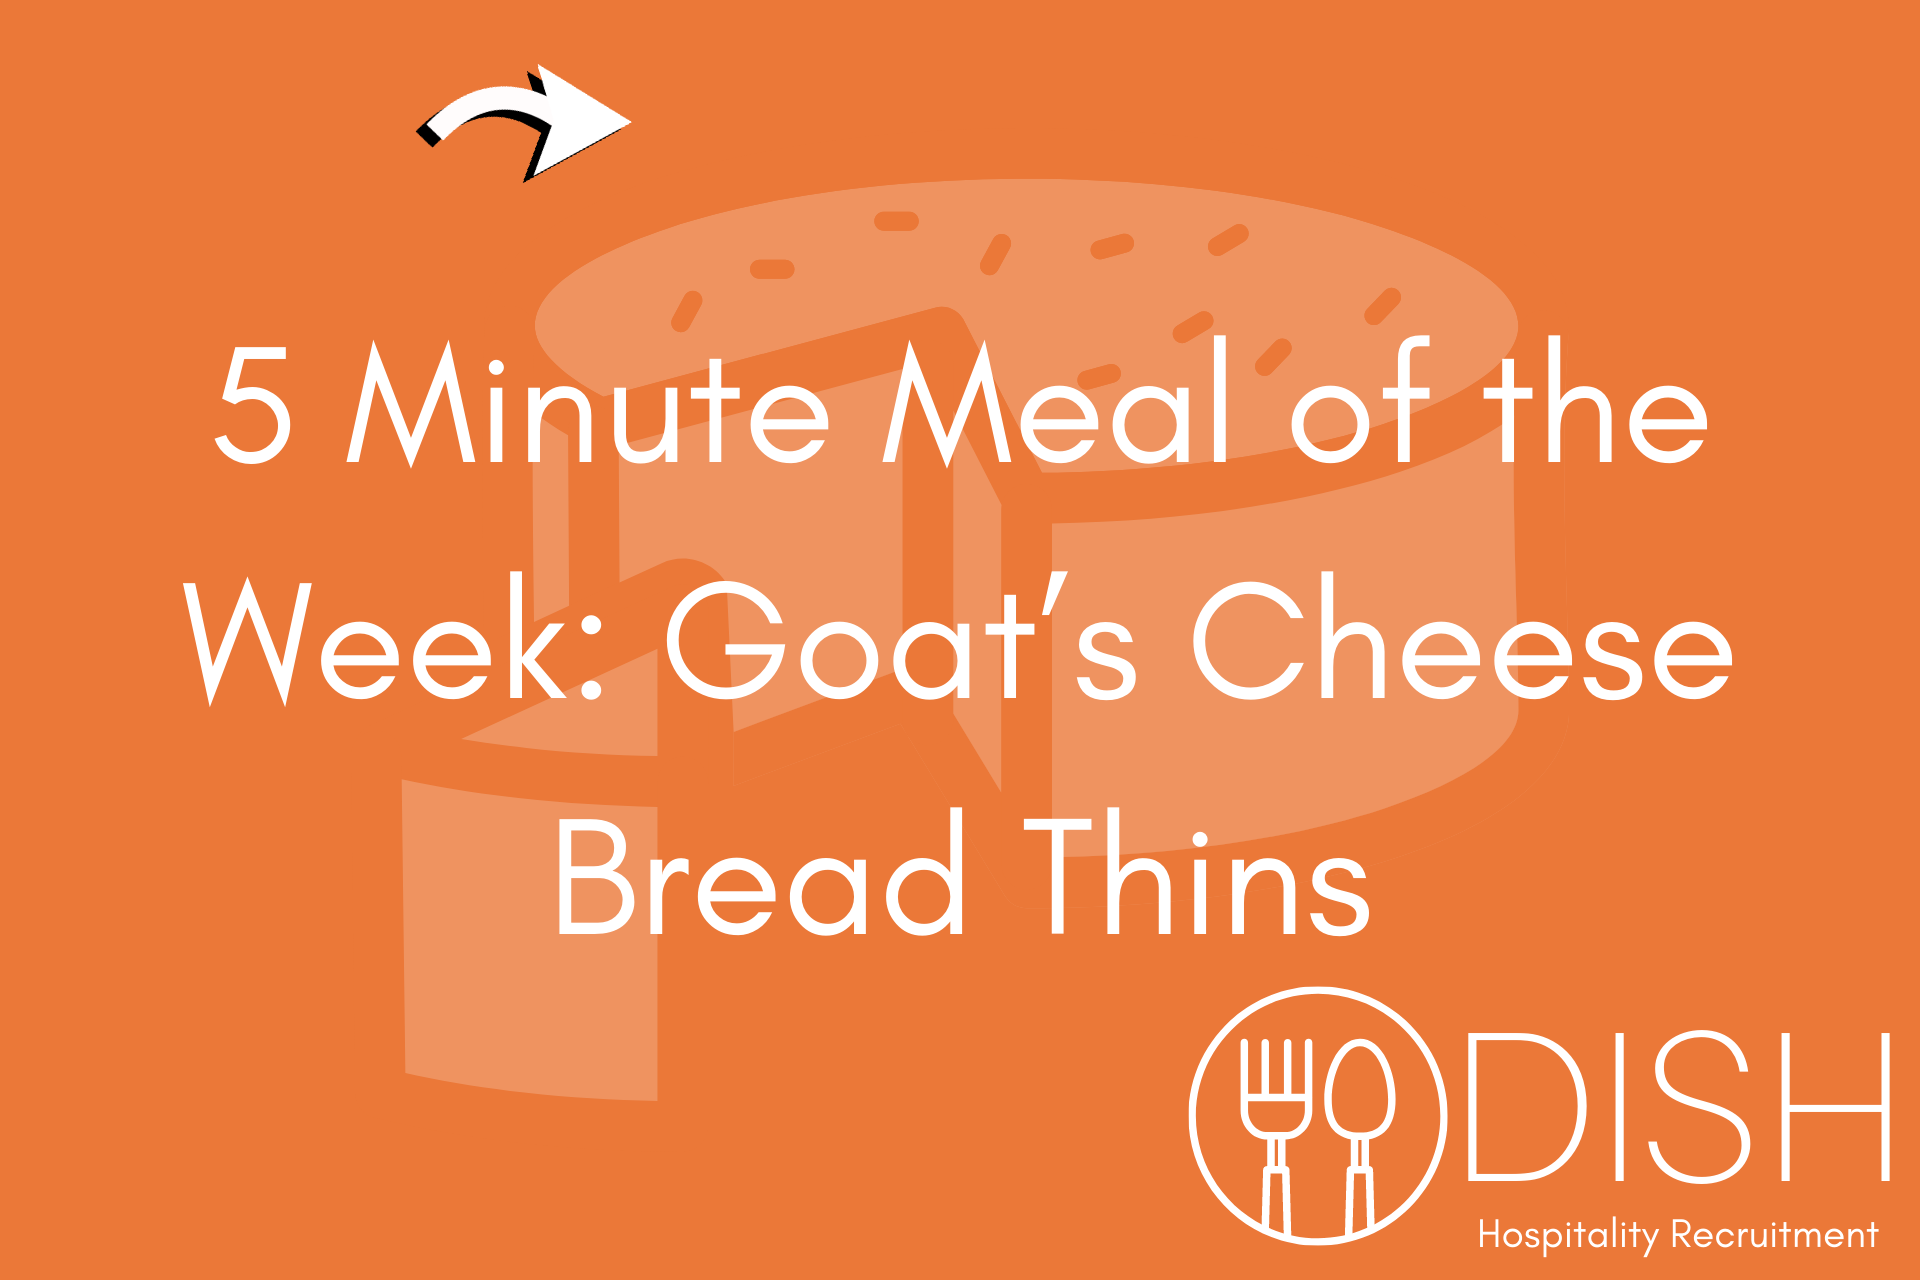 5 Minute Meal of the Week: Goat’s Cheese Bread Thins